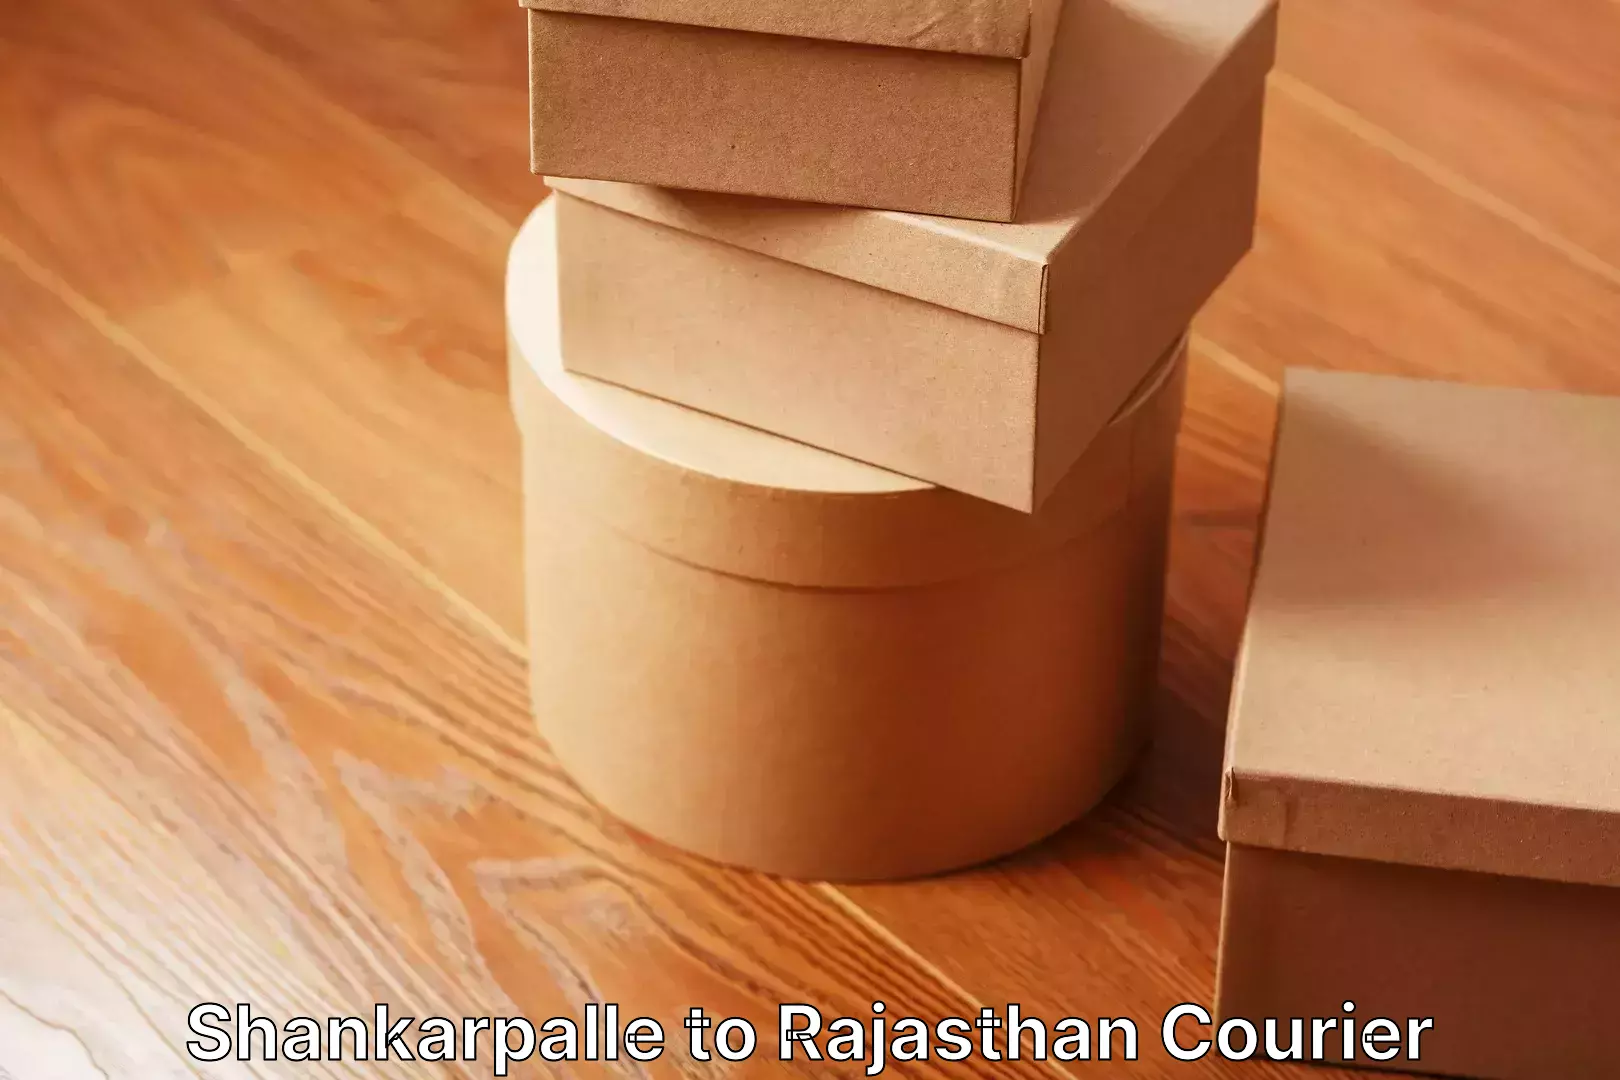 Home goods moving company Shankarpalle to Rajasthan